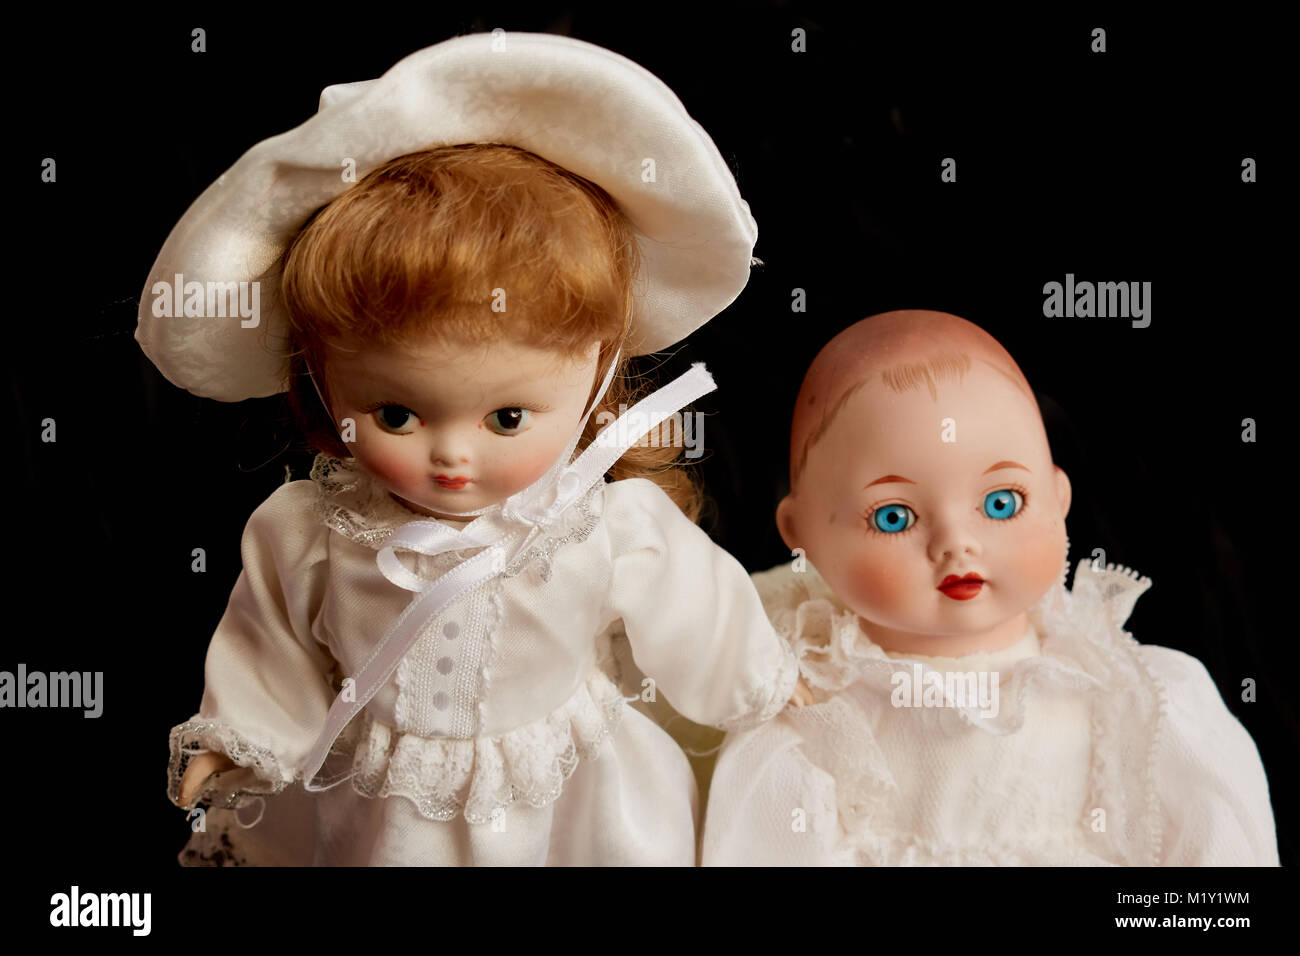 Porcelain Dolls Head High Resolution Stock Photography and Images - Alamy